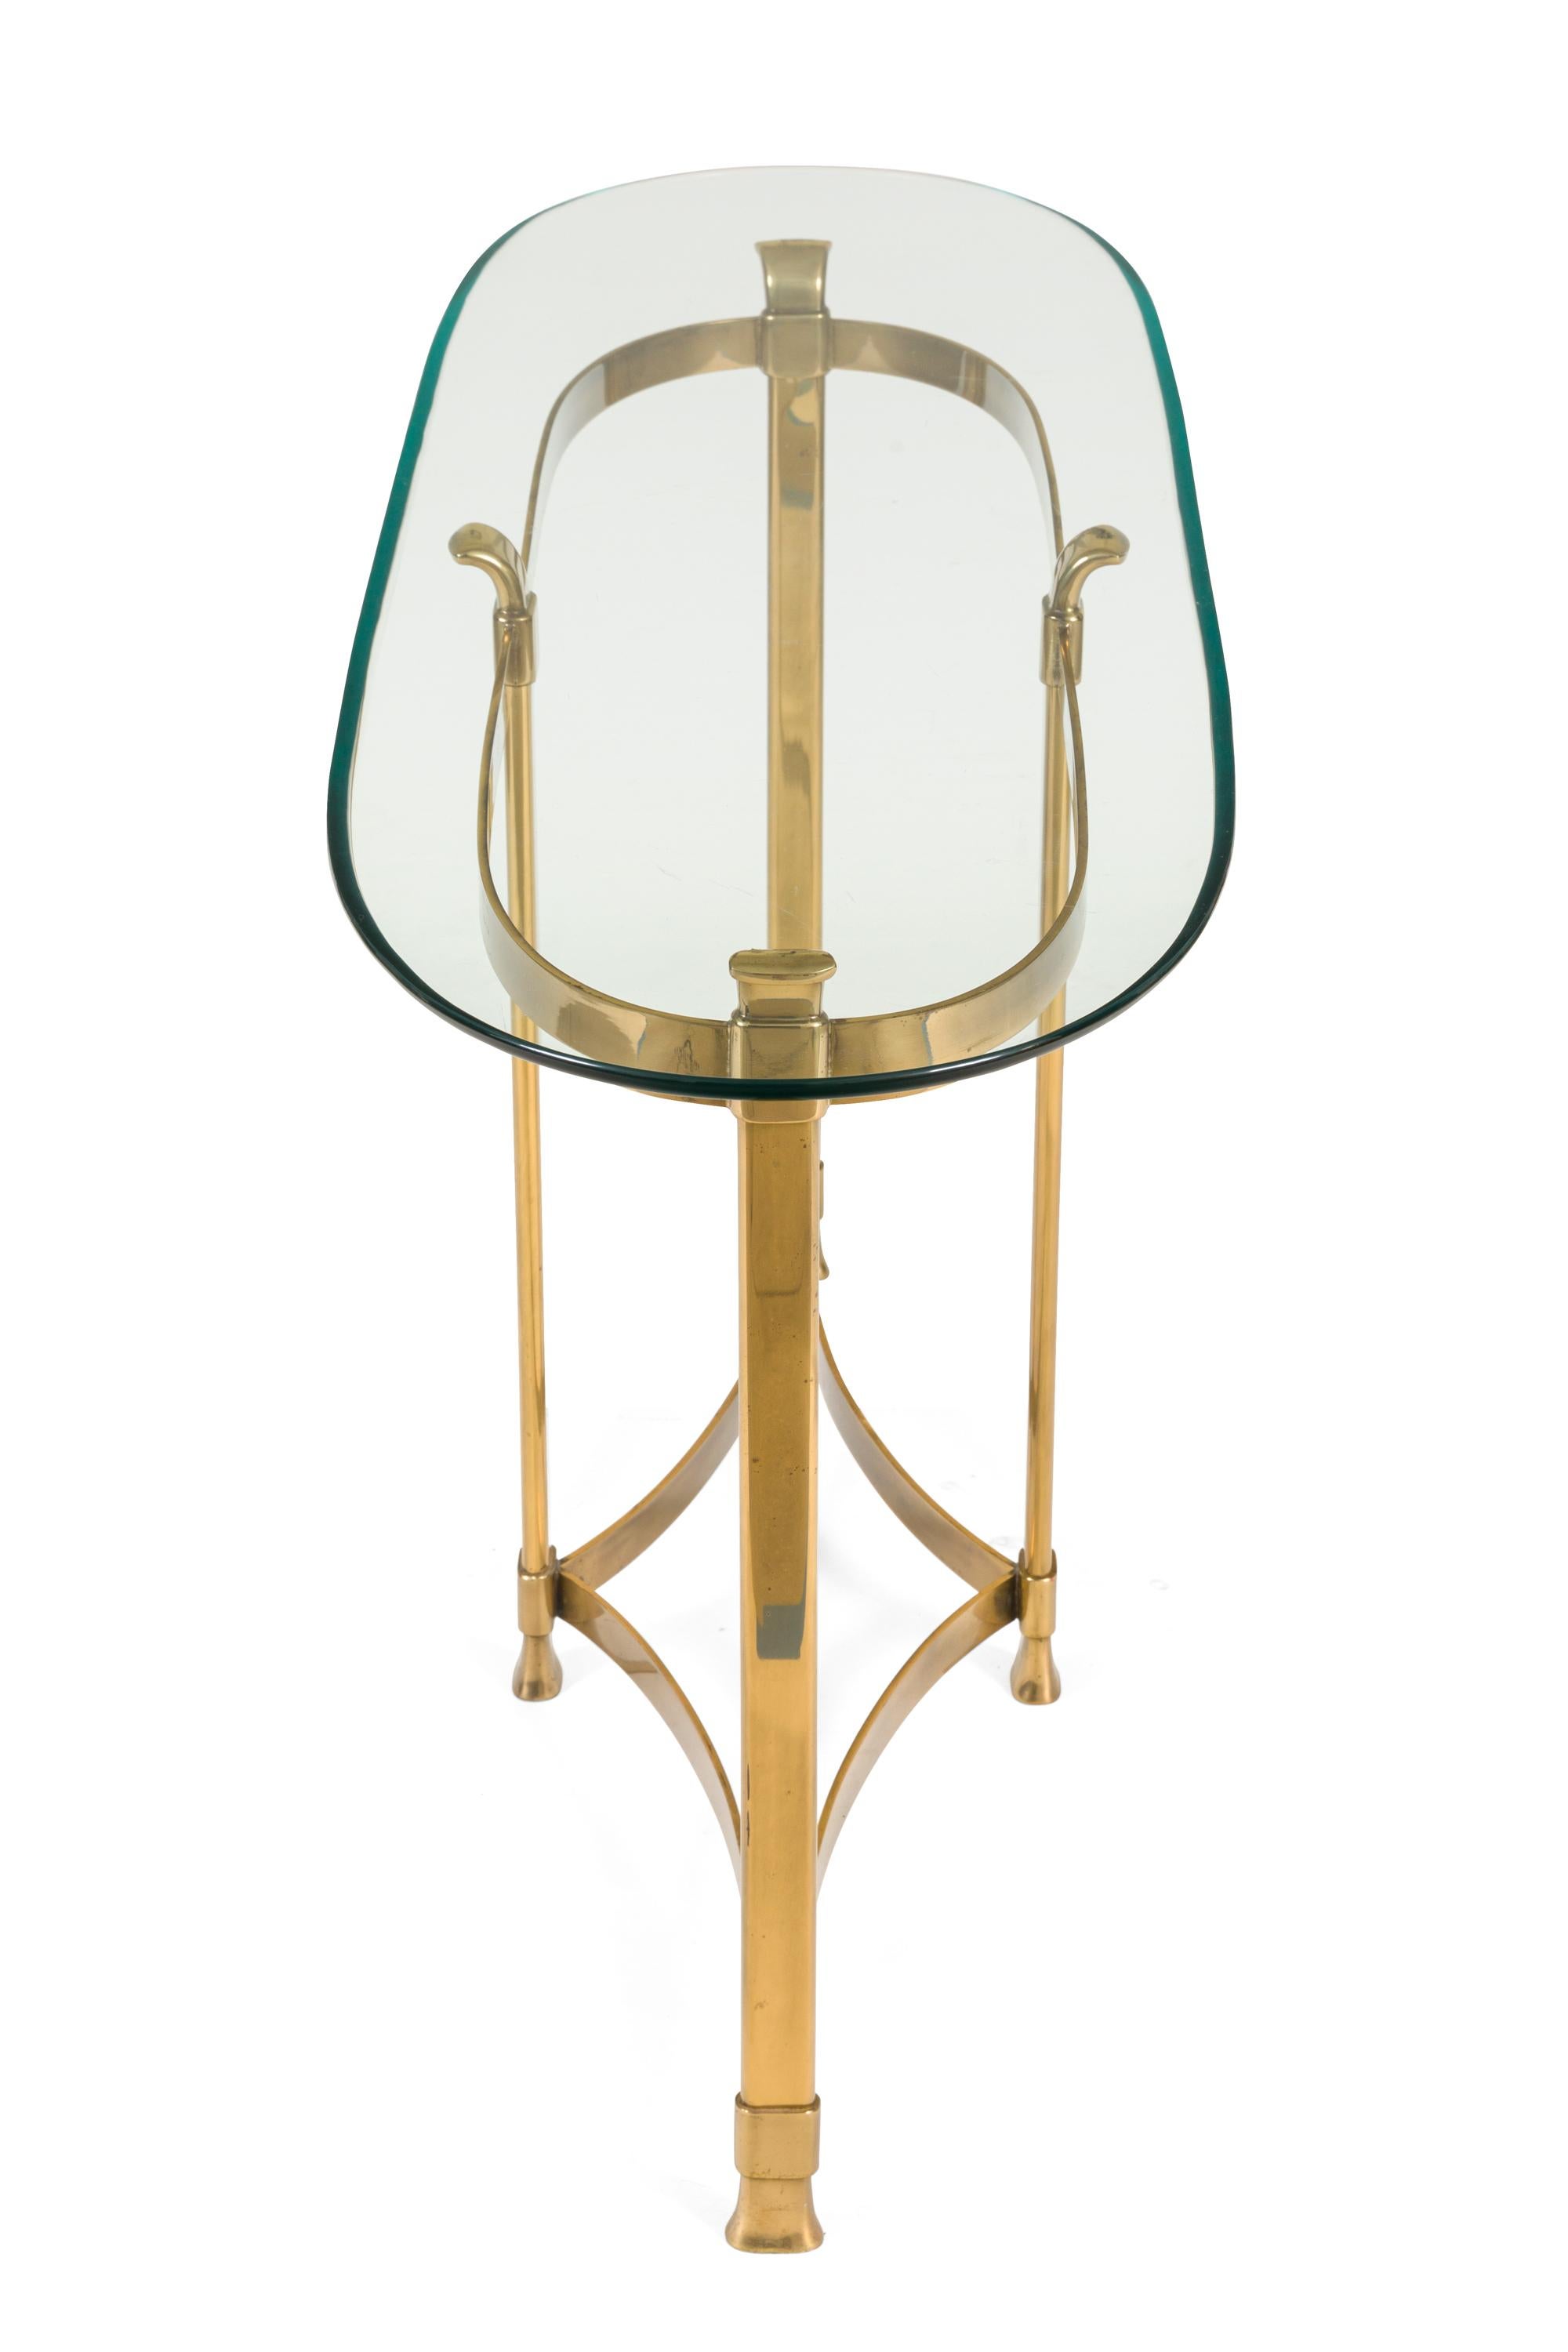 Italian La Barge Brass Console Table with Glass Top, Italy, 1970s